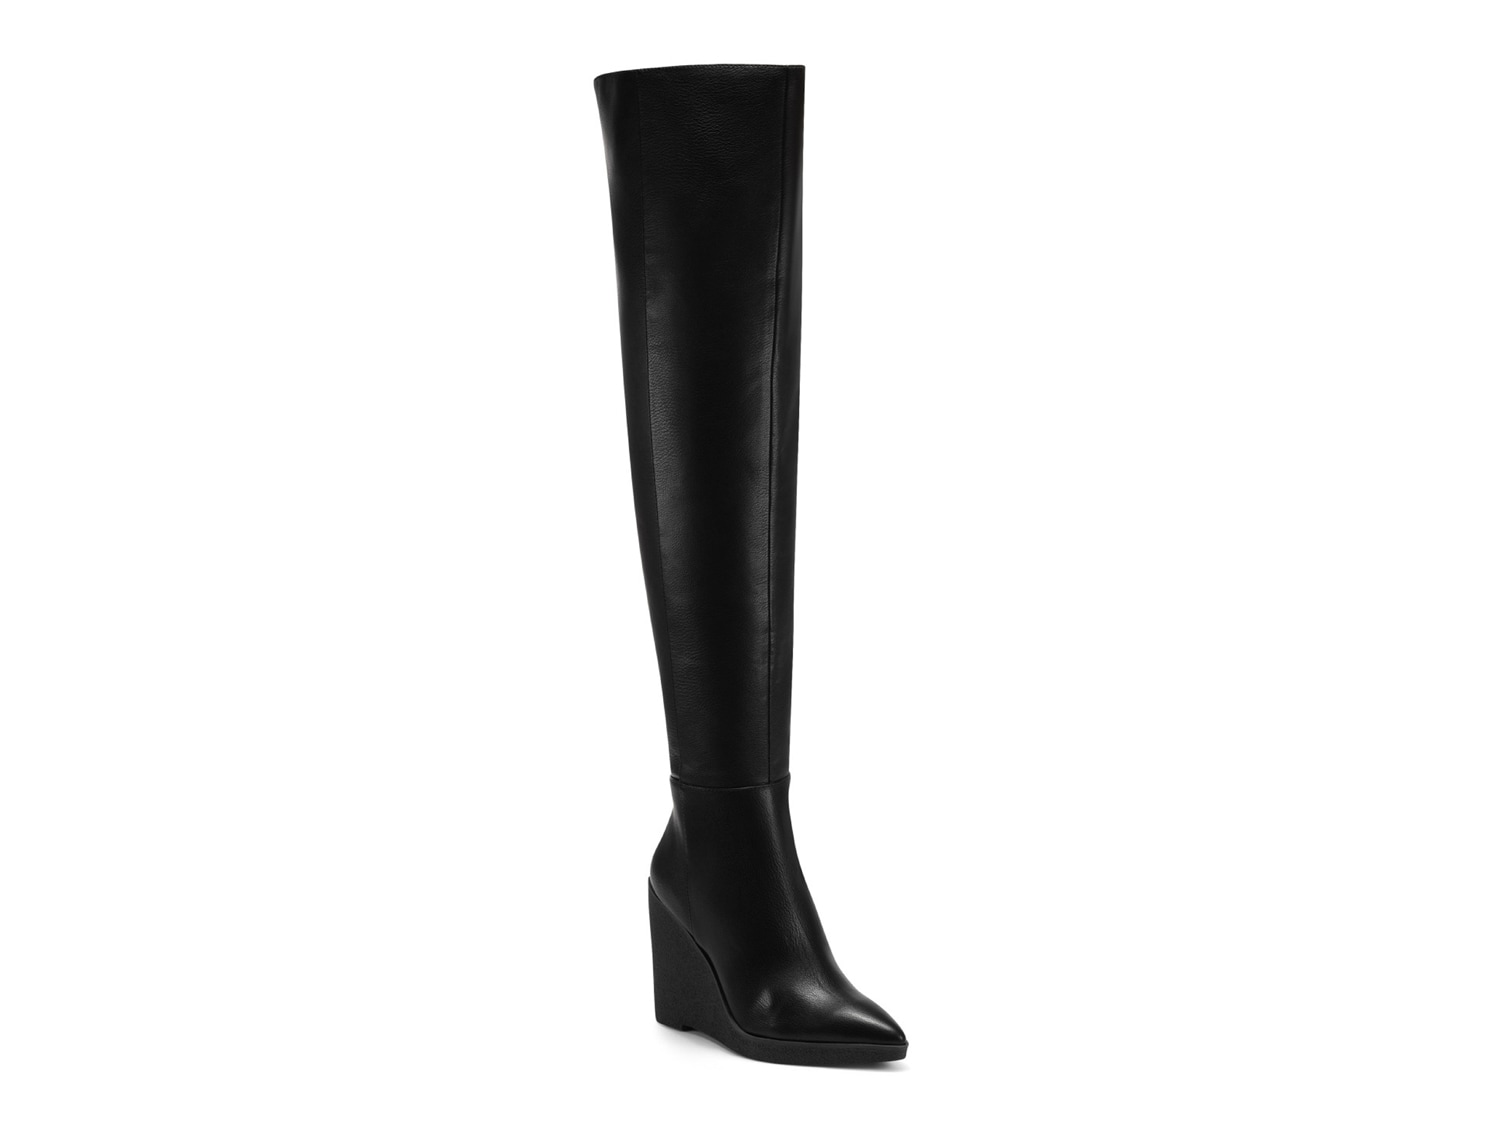 Jessica Simpson Cassida Over-the-Knee Boot - Free Shipping | DSW